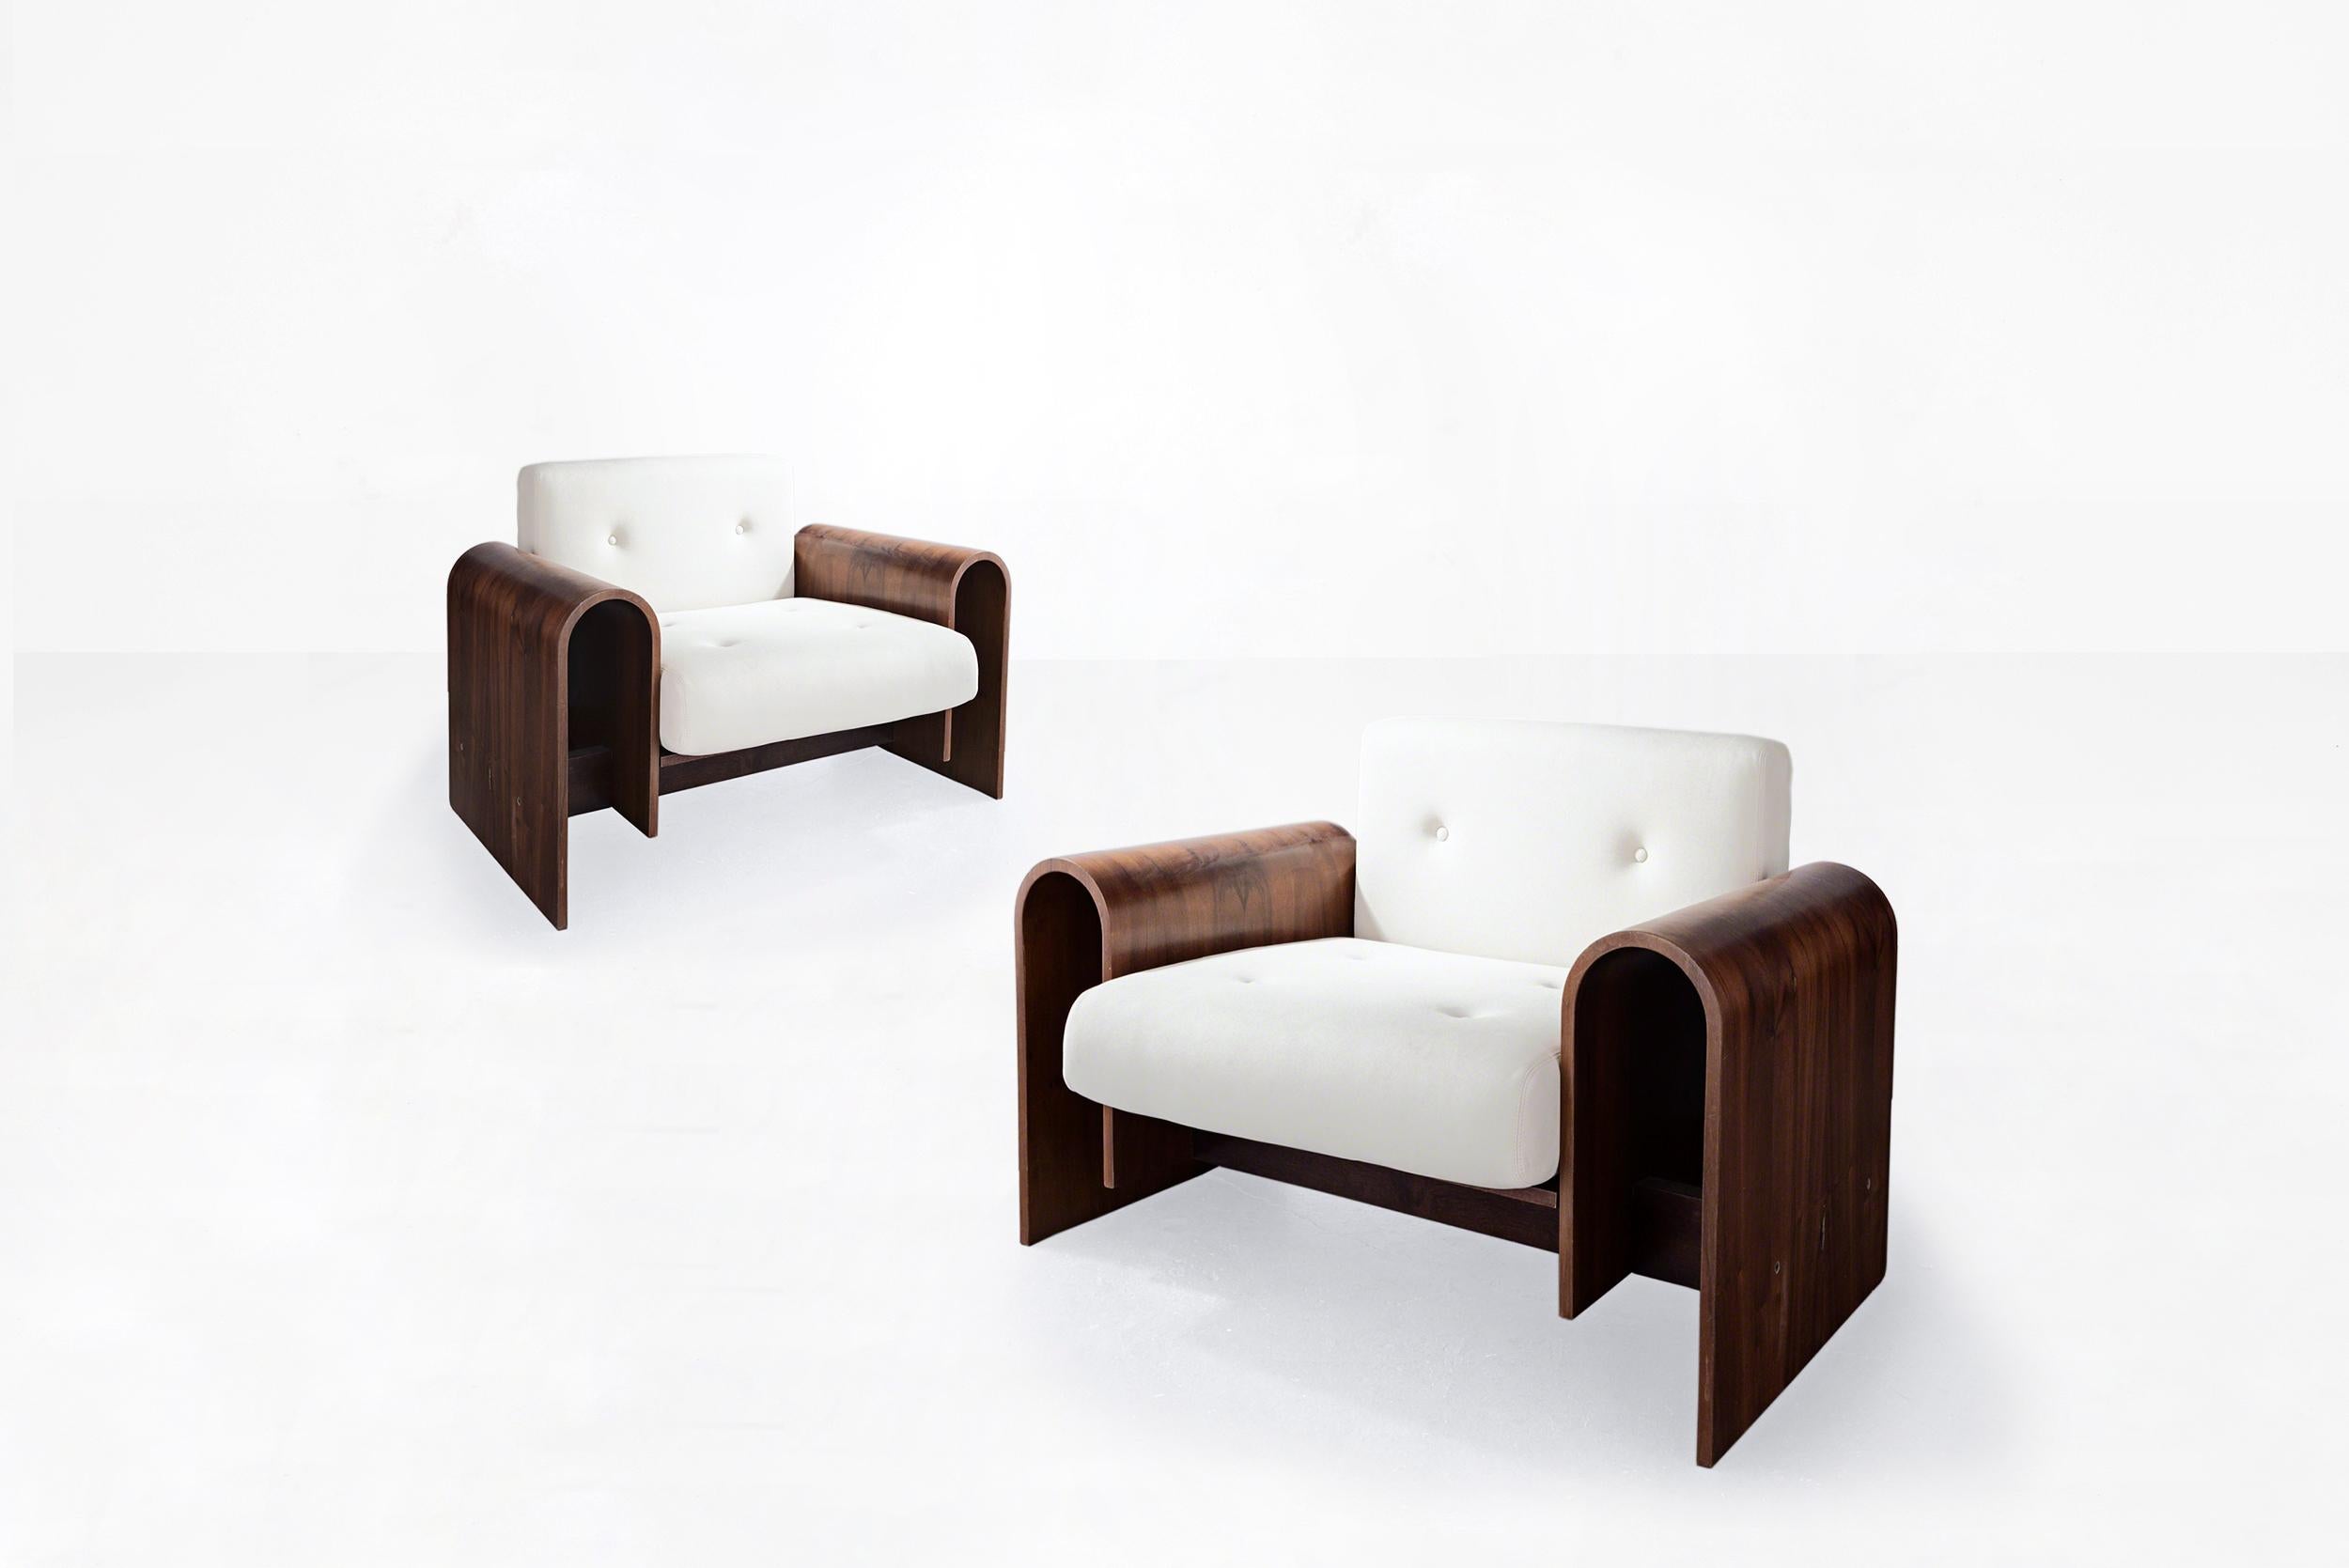 Oscar Niemeyer
Pair of armchairs model “ON”
Manufactured for SESC Hotel
Brazil, 1990
Imbuia wood, wool upholstery
From the archives of Side Gallery, Barcelona 

Measurements
100 cm x 85 cm x 70 H cm
39.37 in x 33.46 in x 27.55 H